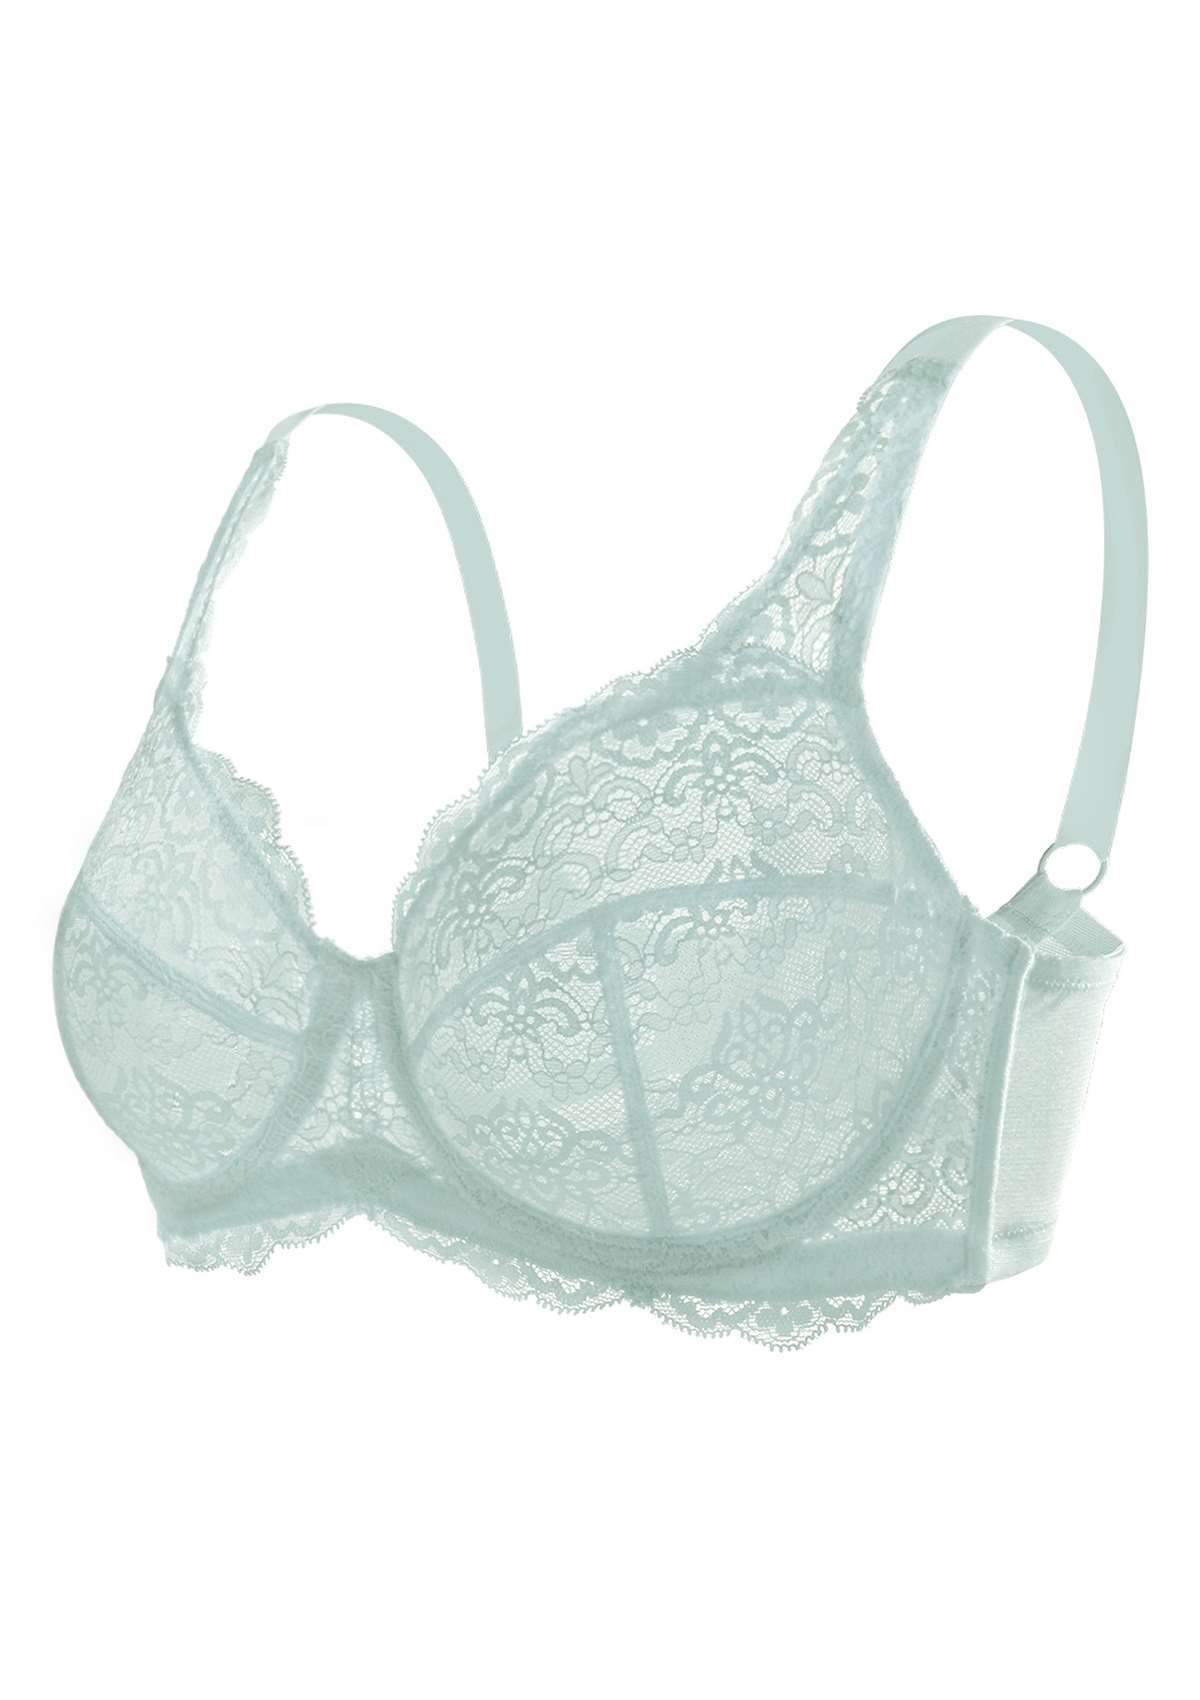 HSIA All-Over Floral Lace: Best Bra For Elderly With Sagging Breasts - Crystal Blue / 42 / DDD/F